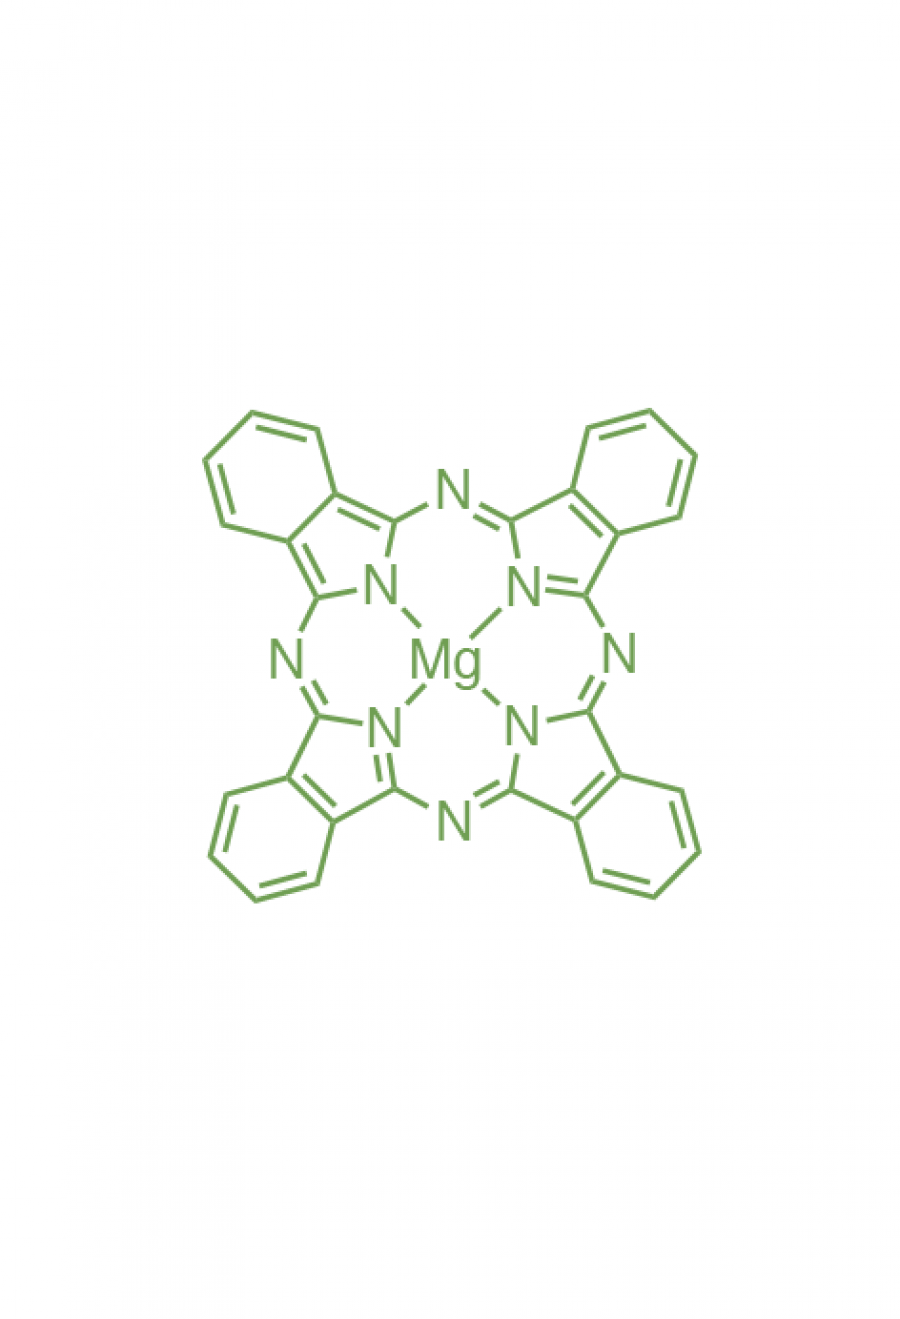 magnesium(II) phthalocyanine  | Porphychem Expert porphyrin synthesis for research & industry